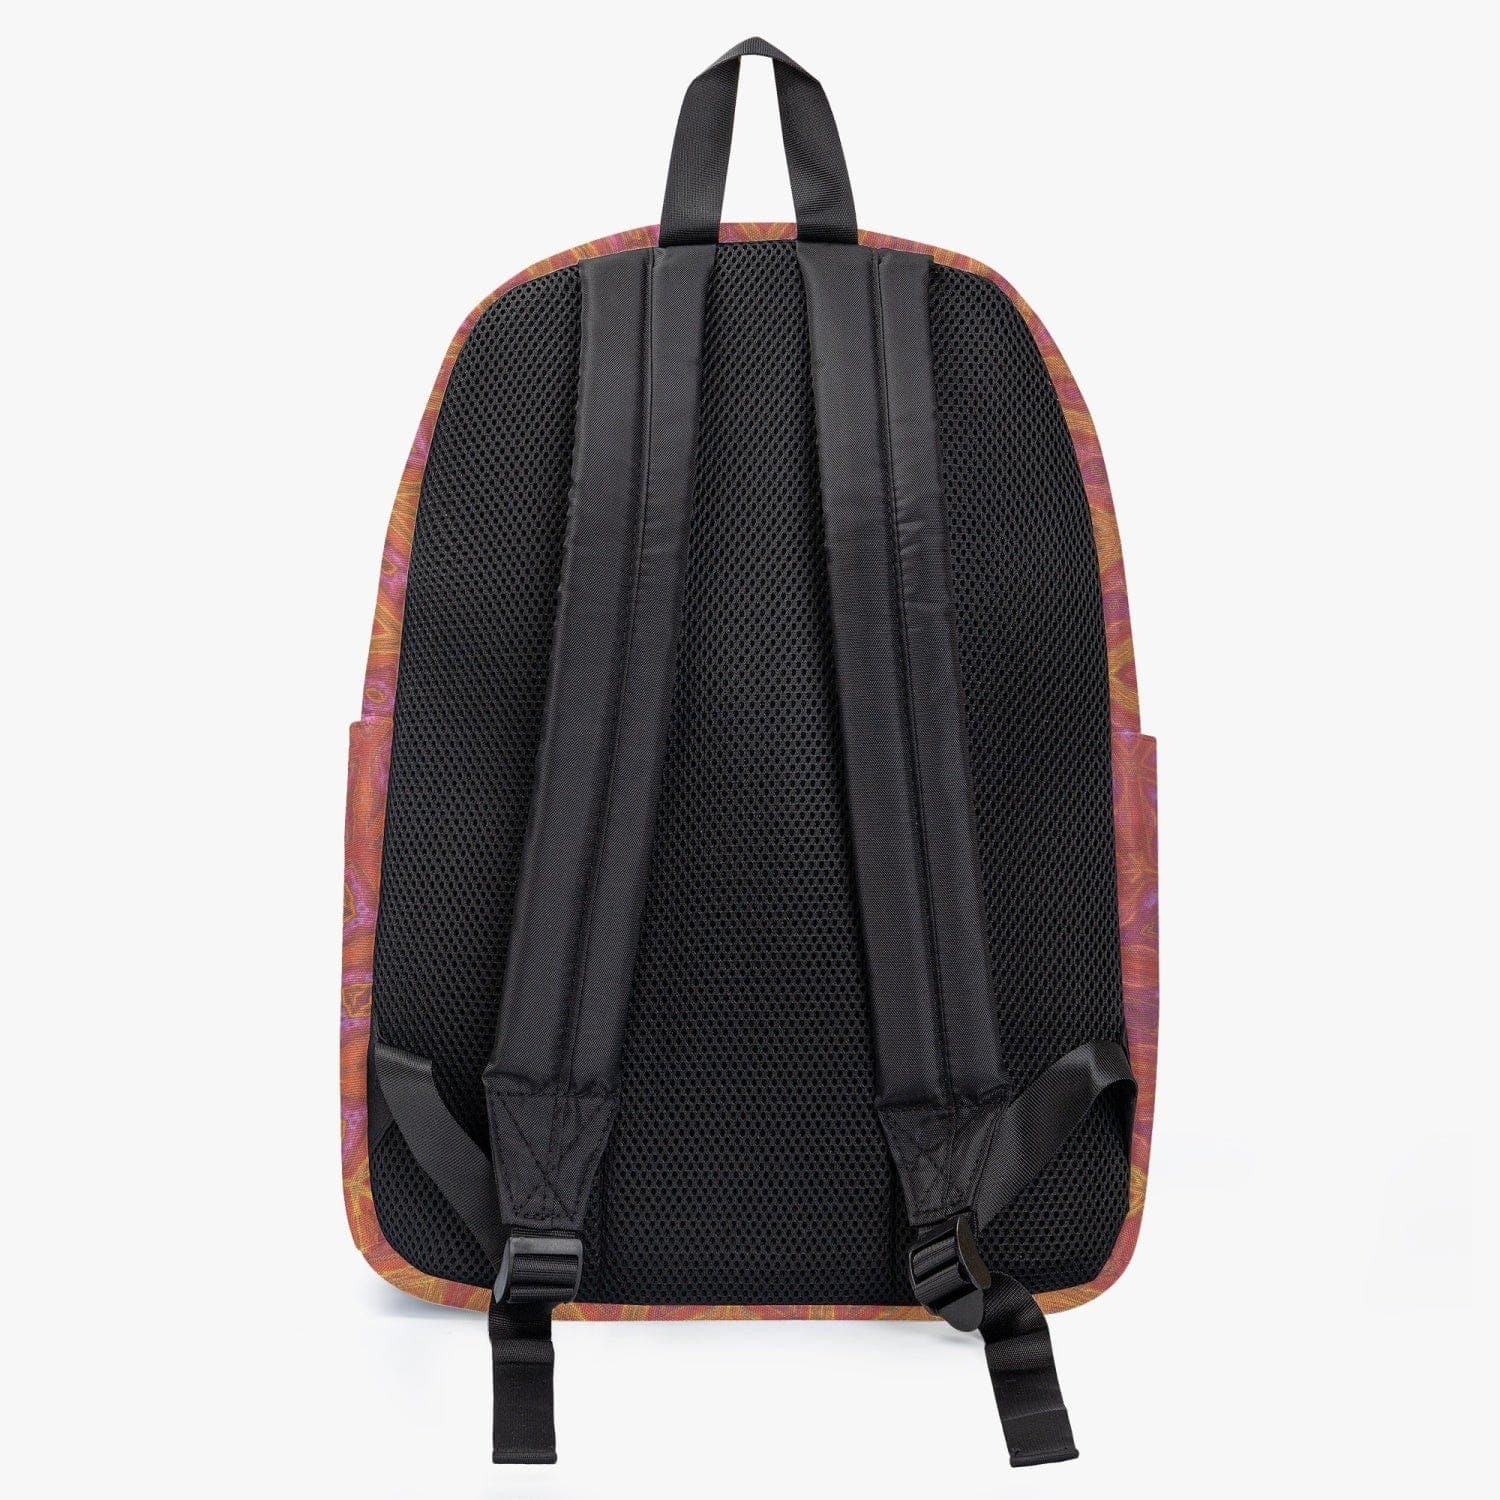 Summer day,  Trendy Cotton Canvas Backpack, designed by Sensus Studio Design